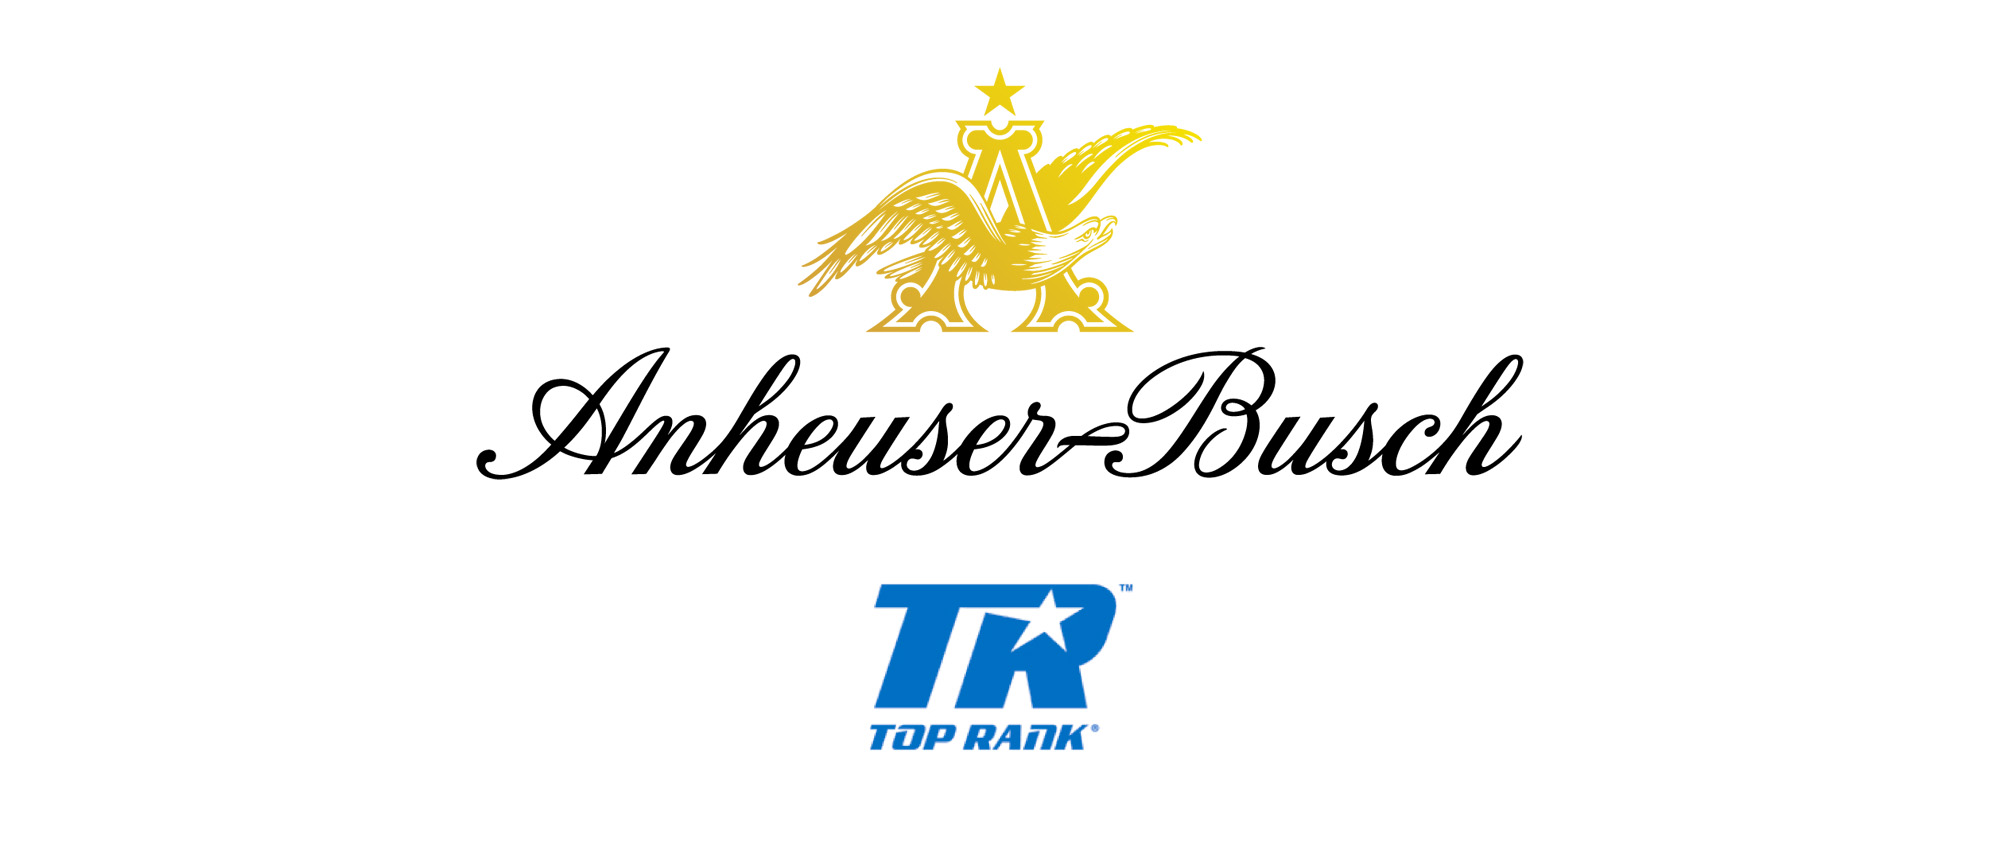 Bud Light Goes Another Round with Top Rank as Boxing Promoter’s Official Beer and Hard Seltzer Sponsor in Expansive Renewal